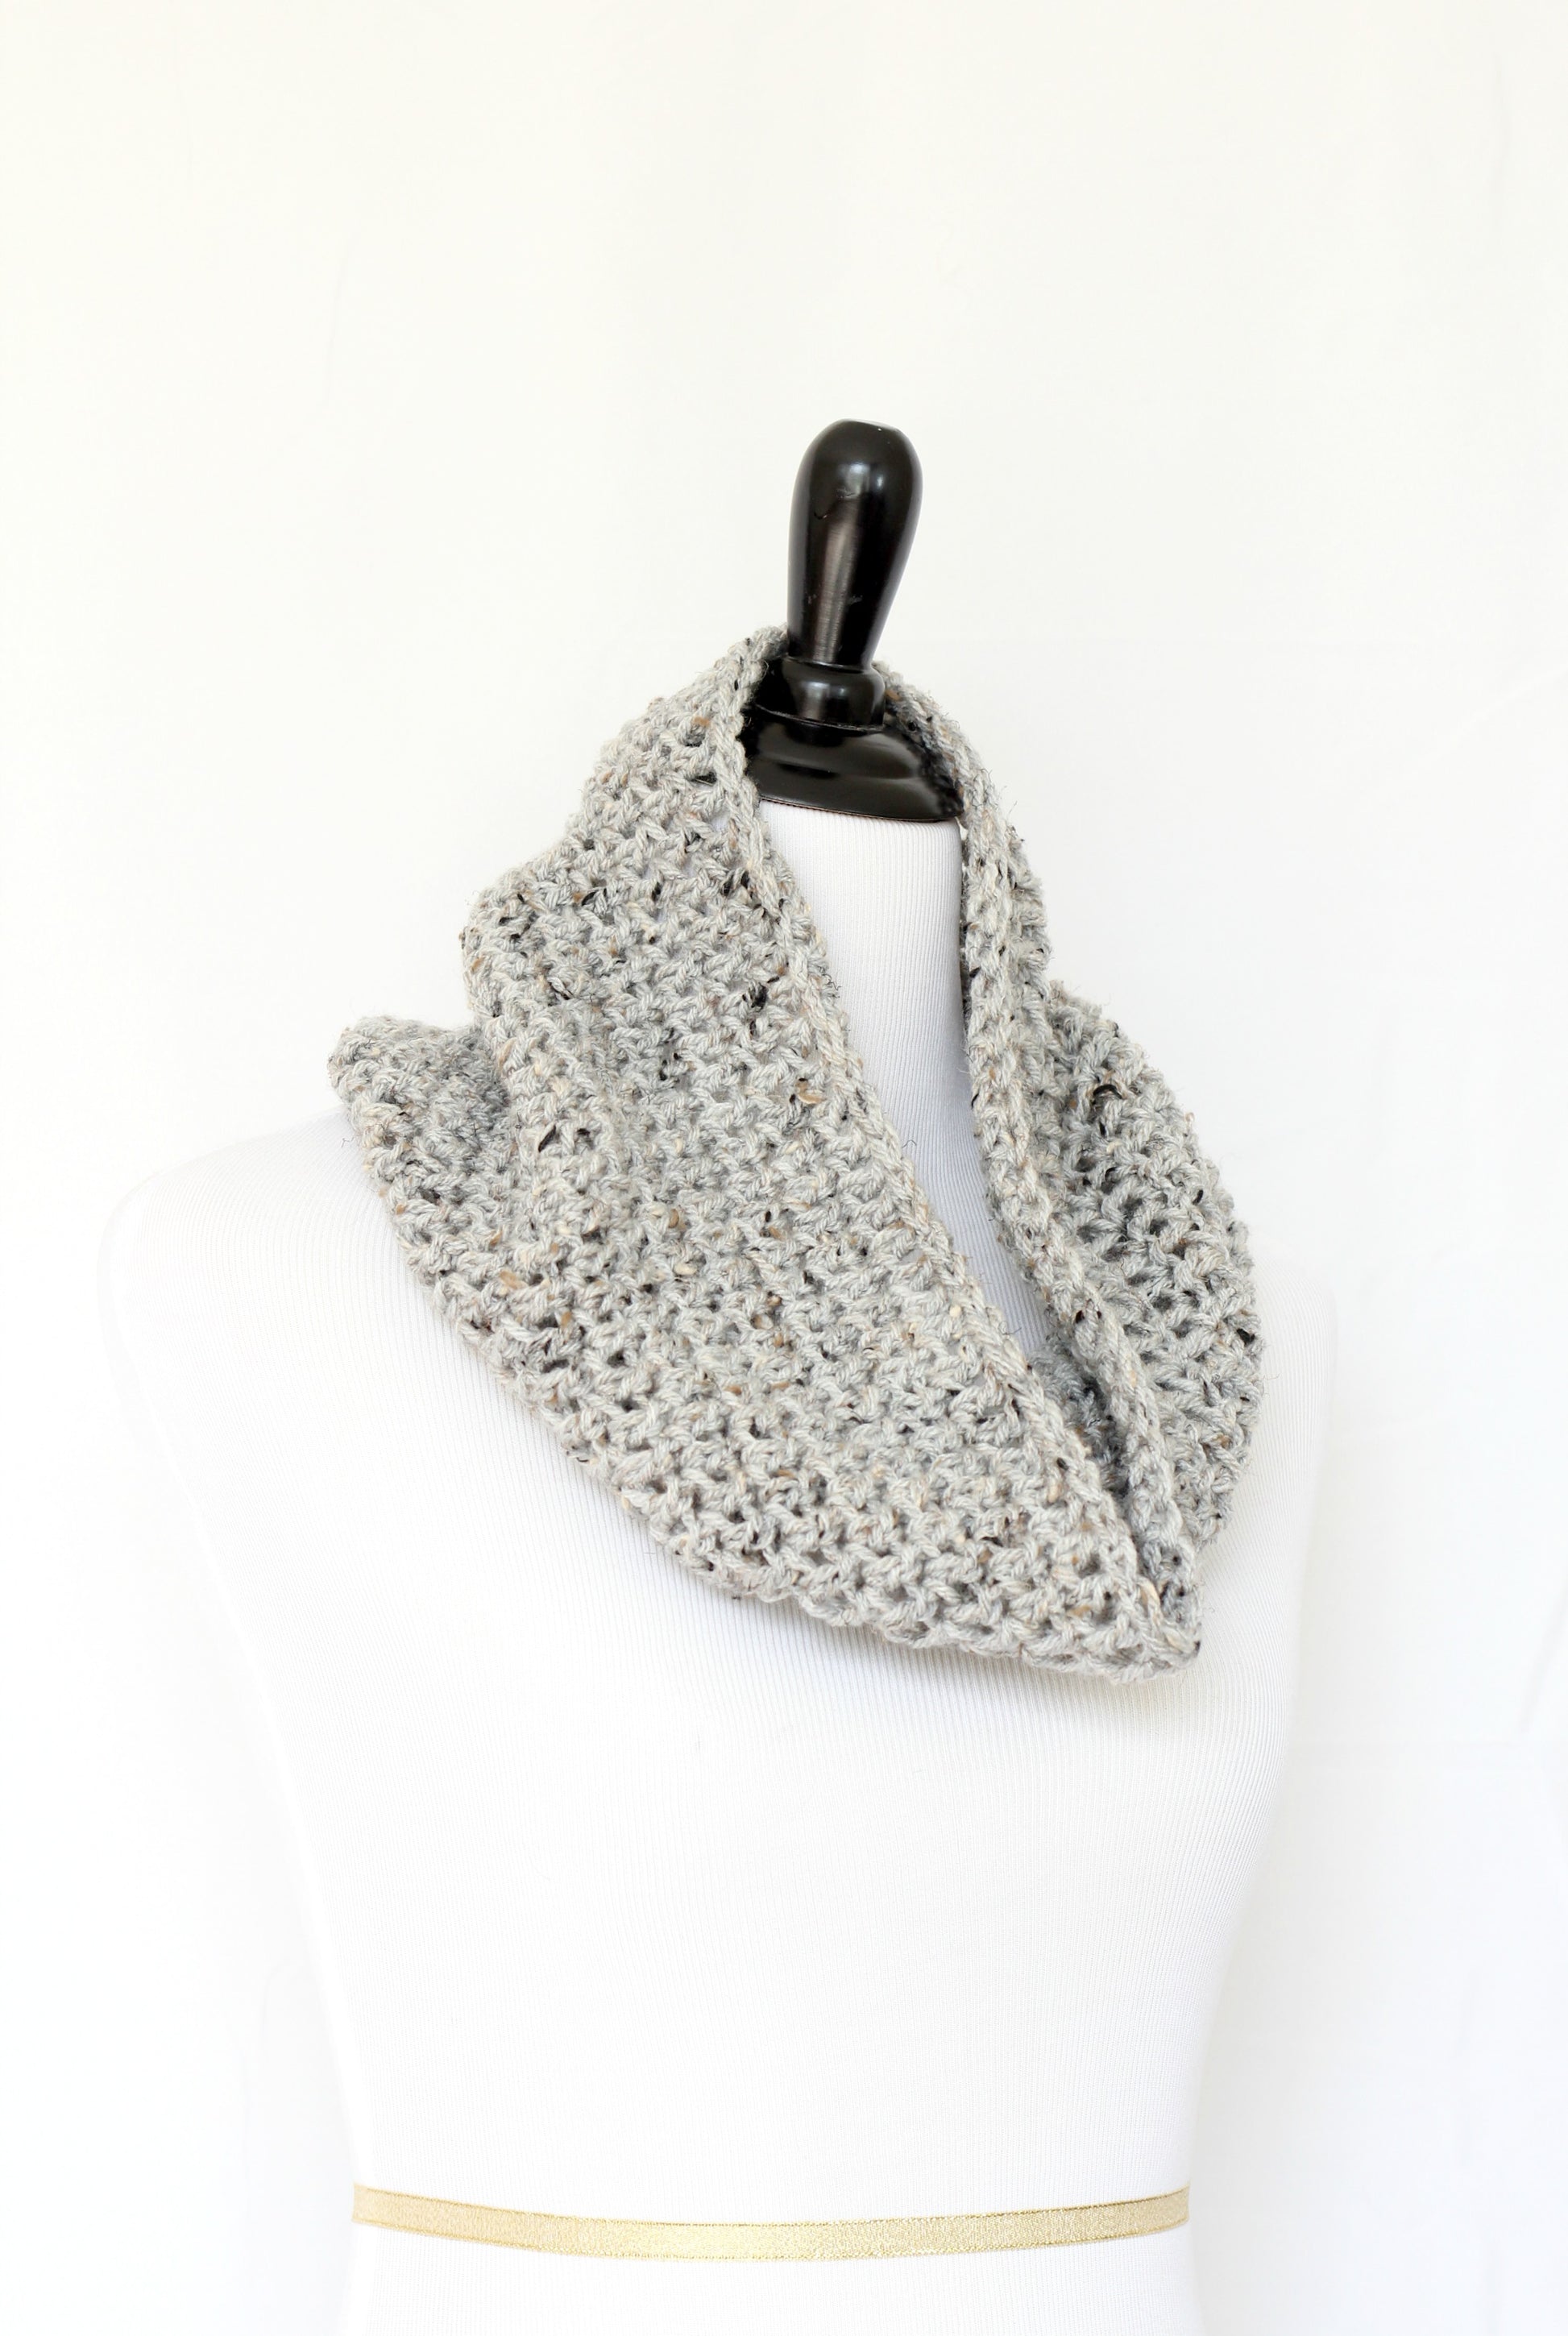 Crochet infinity scarf in grey color, chunky cowl - 12 colors available